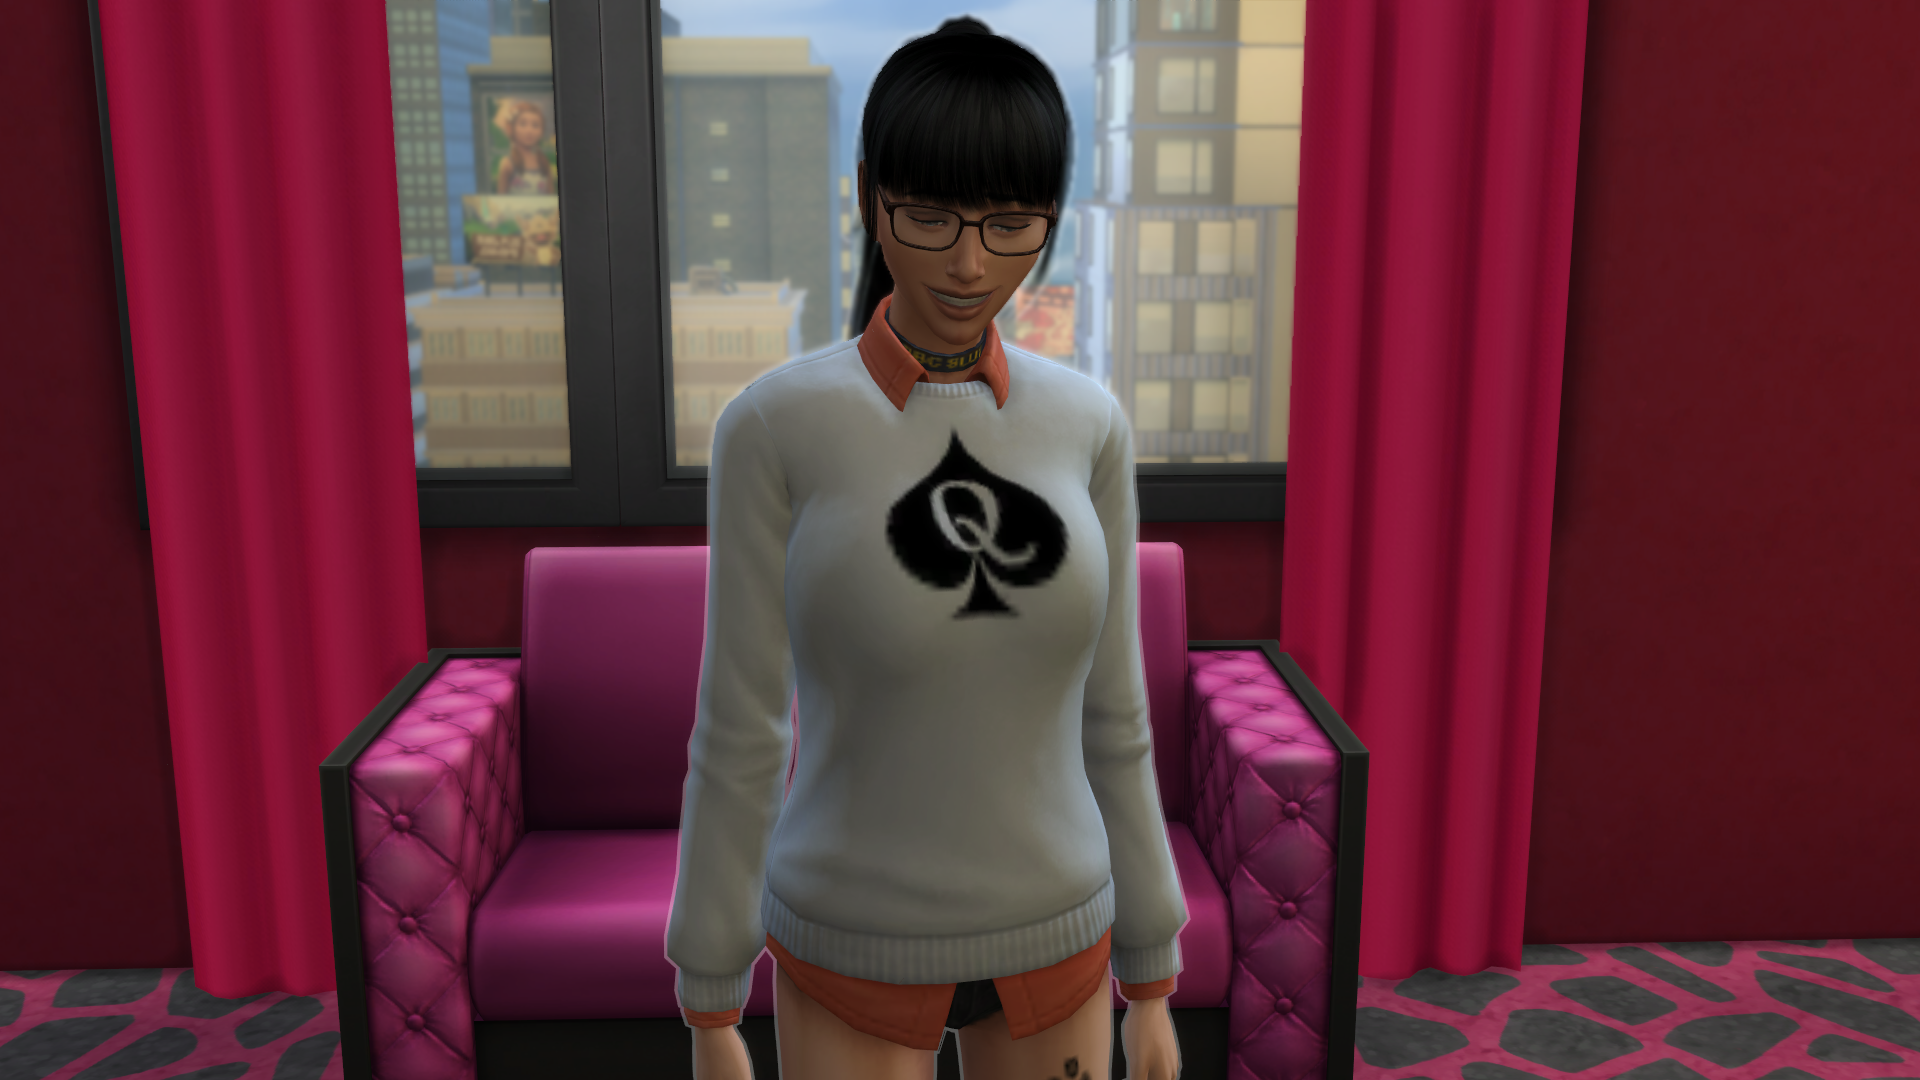 amber kernodle recommends sims 4 cuckold mod pic